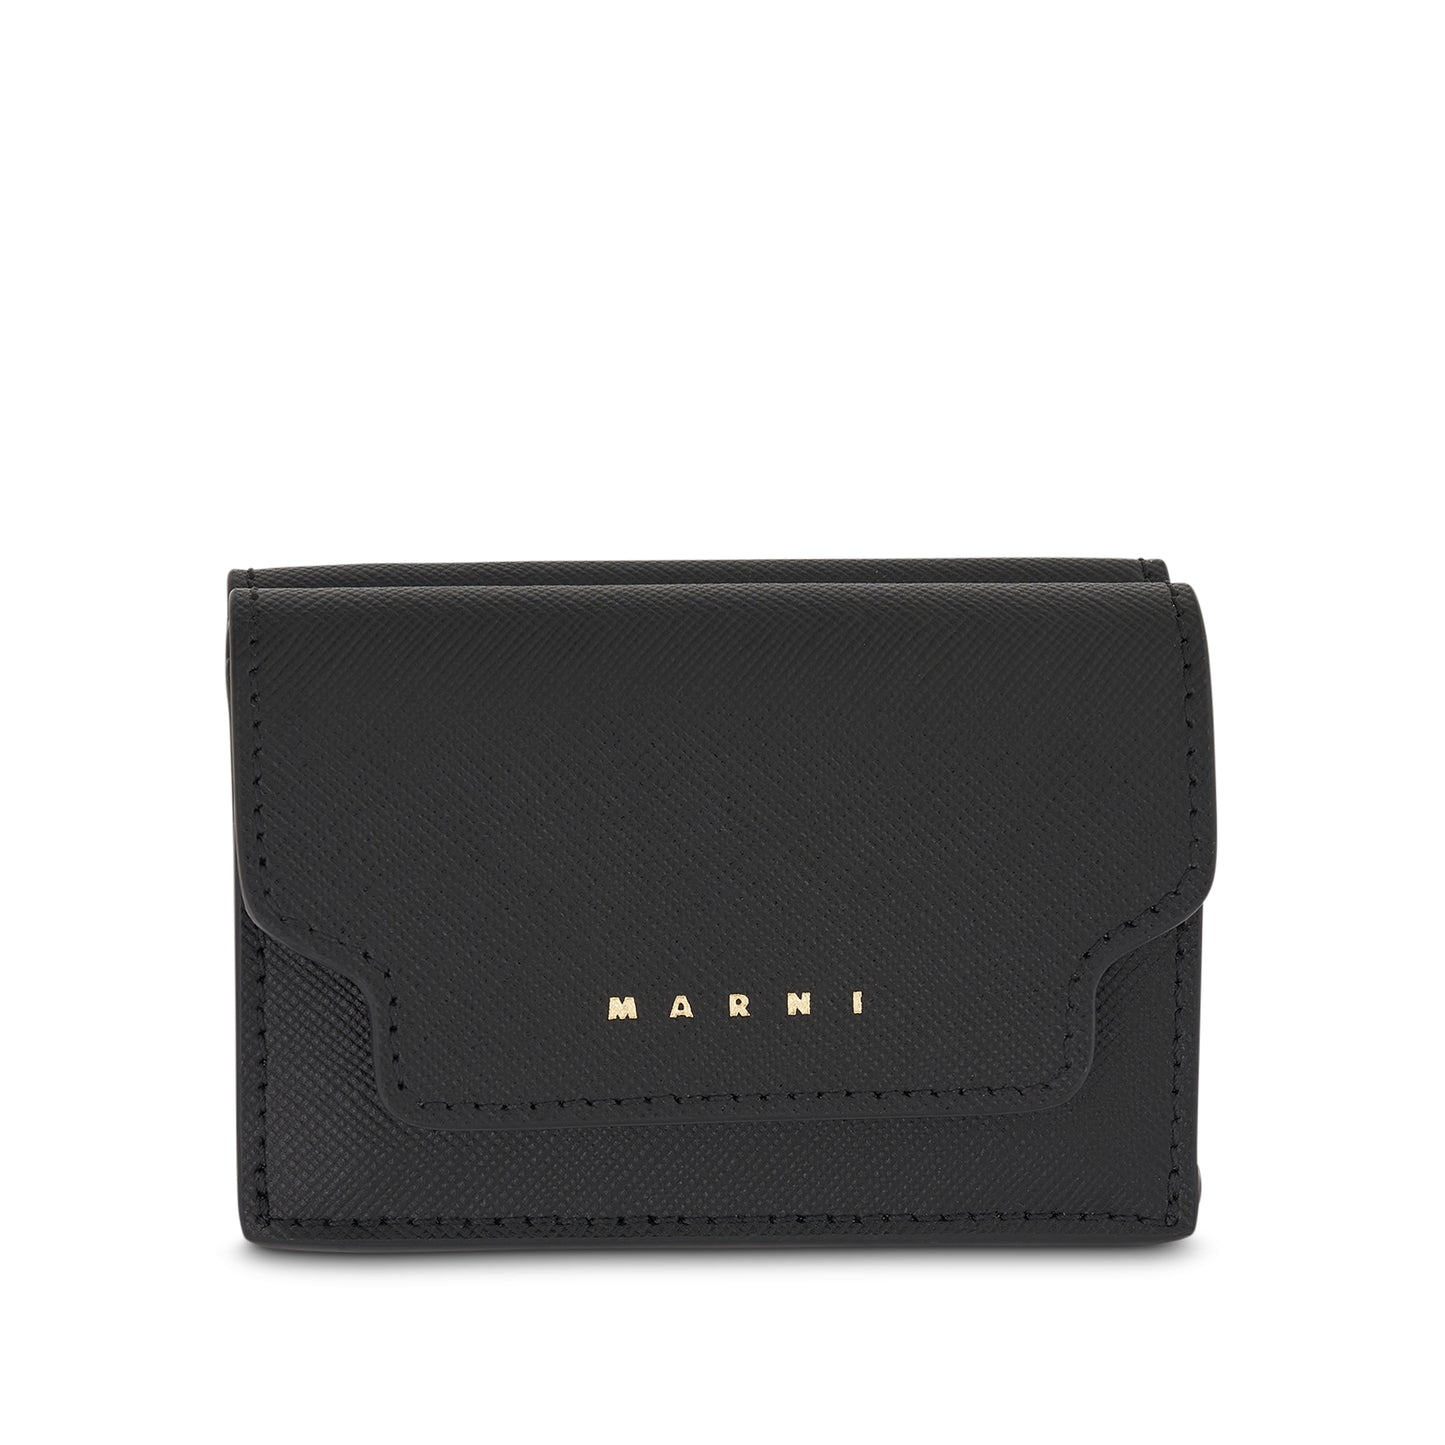 Trifold Saffiano Leather Wallet in Black